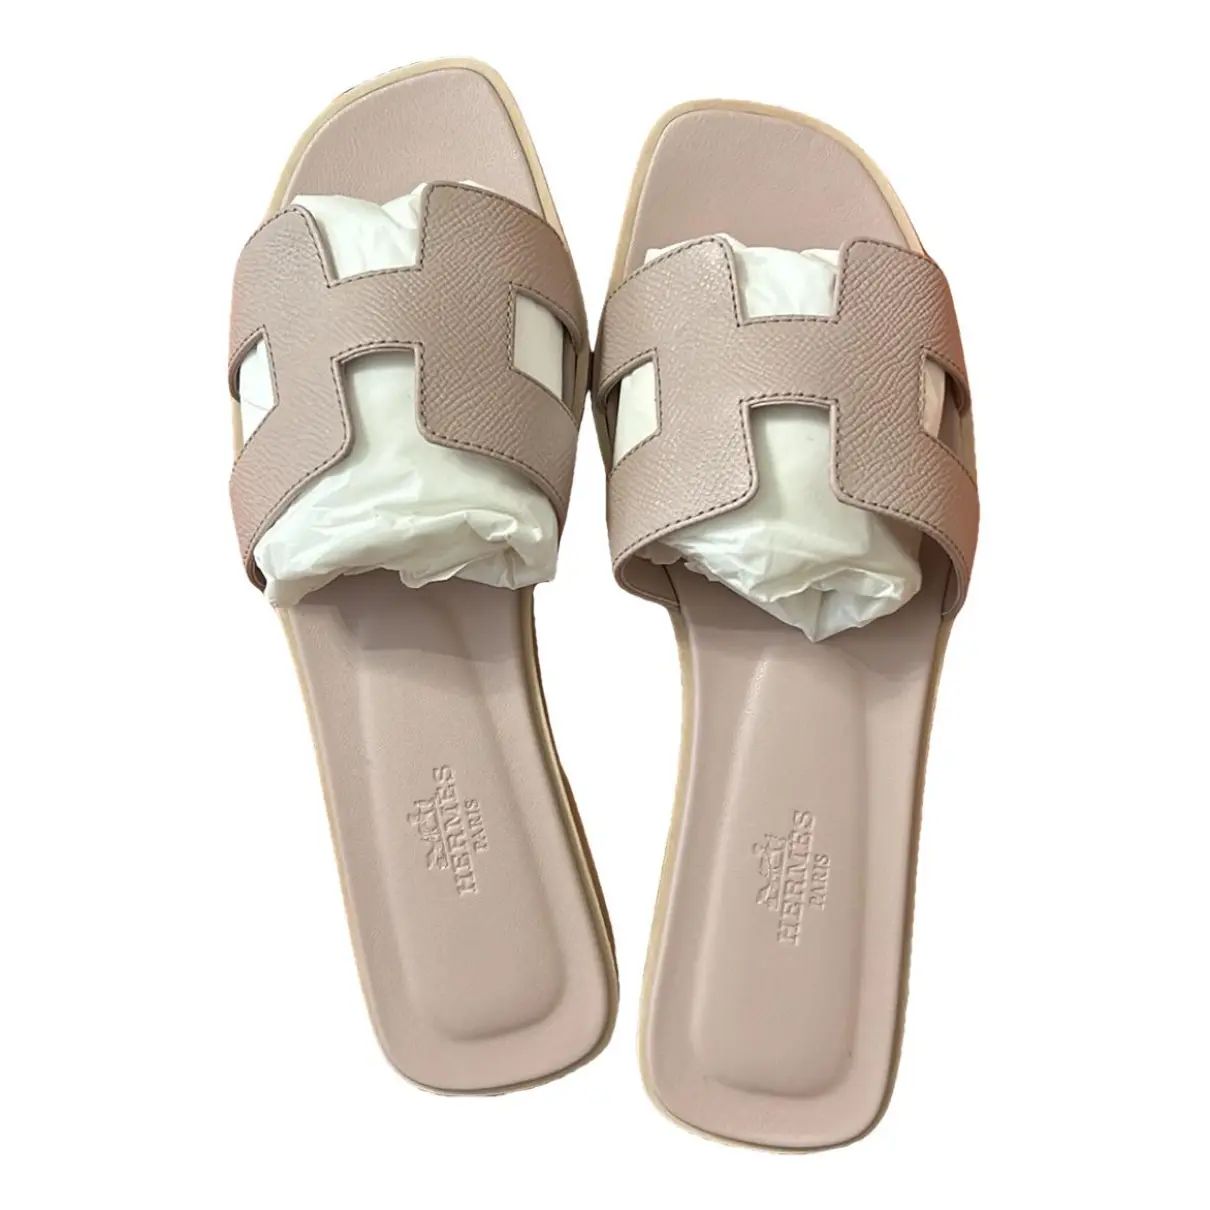 HermèsOran leather sandal37.5EUNever wornPink, Leather$880$771.10Use code COLLECTIVE15 for 15% o... | Vestiaire Collective (Global)